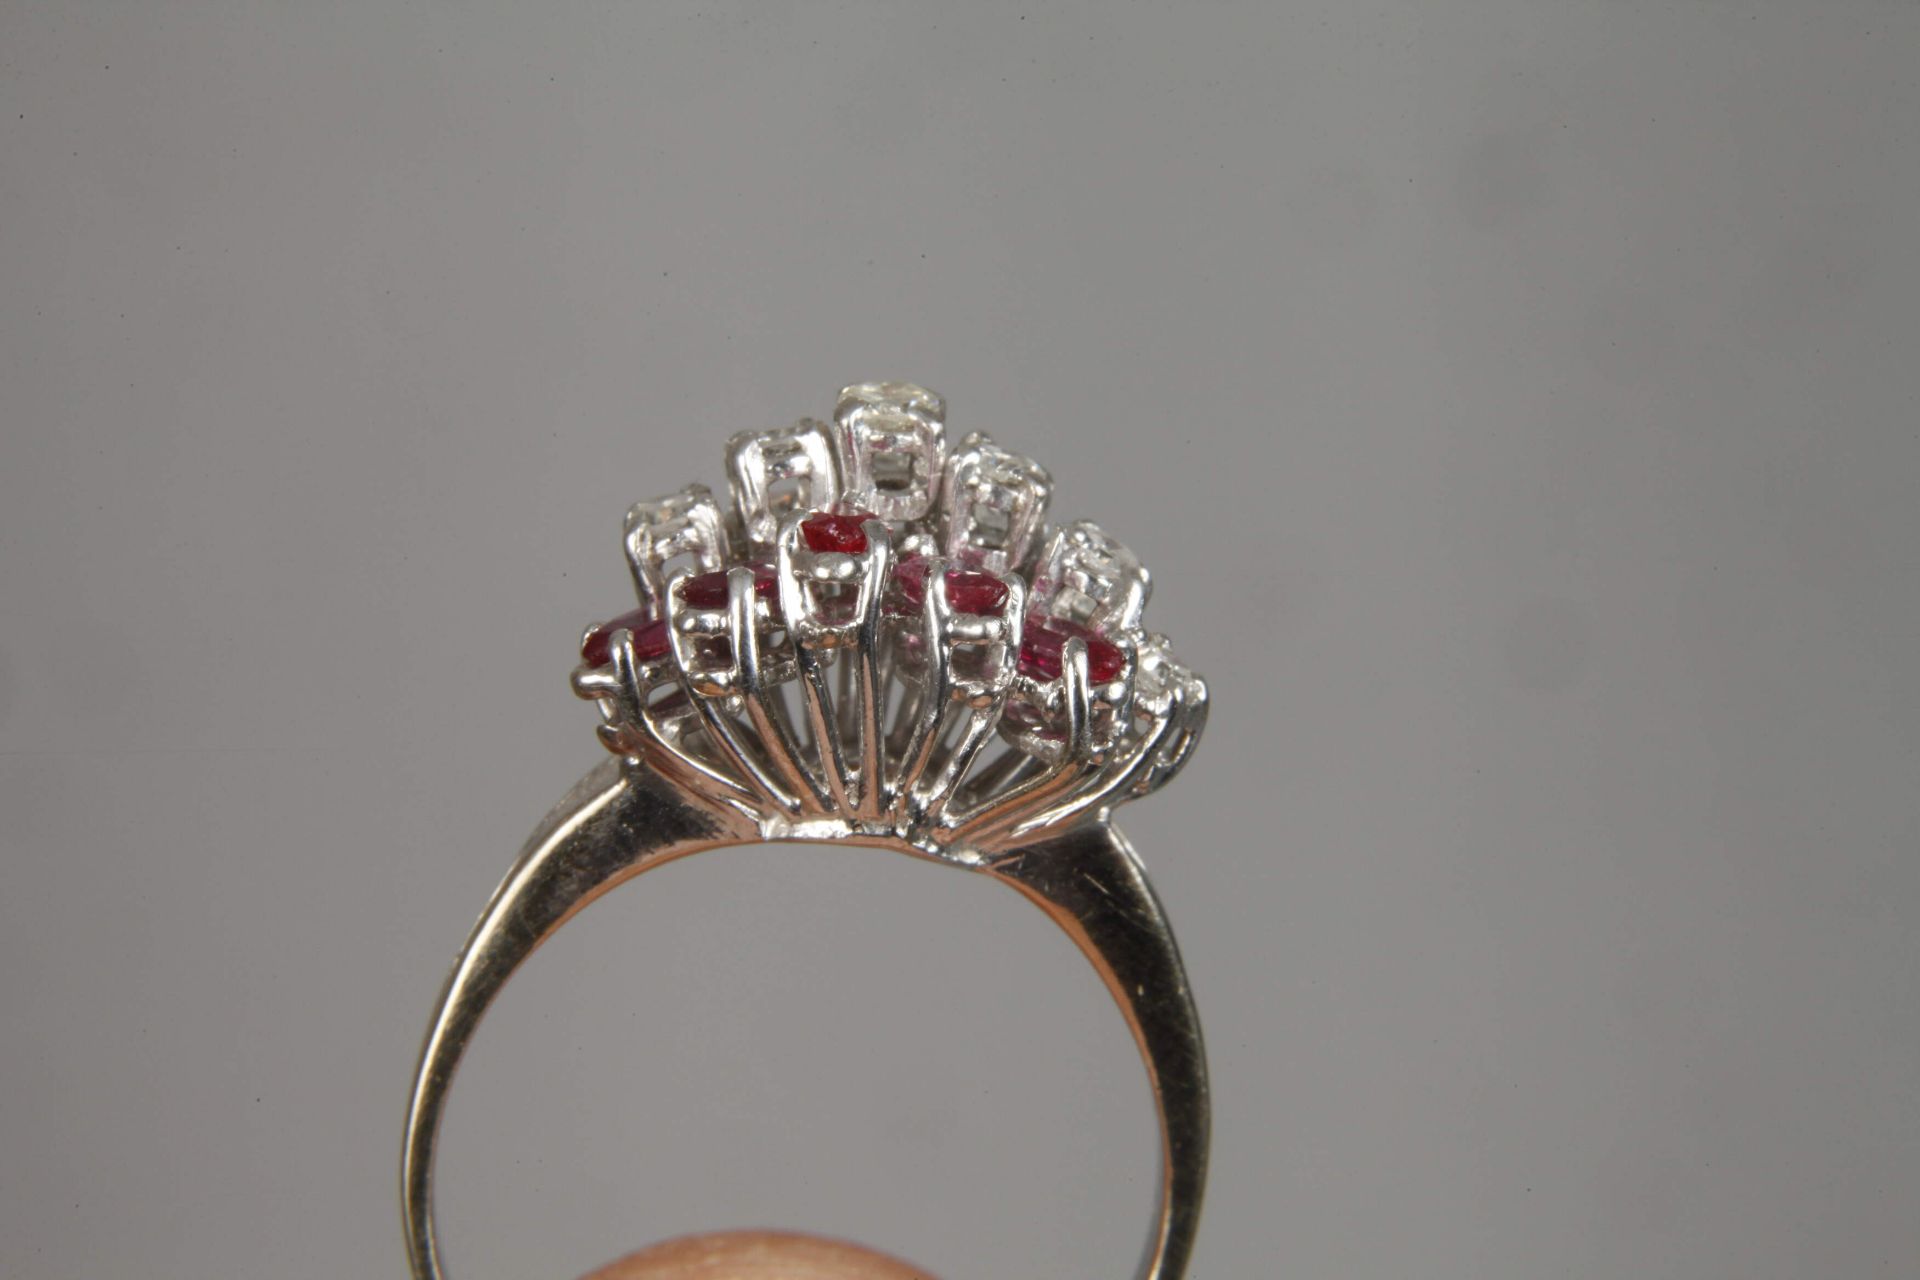 Lady's ring with rubies and brilliant-cut diamonds - Image 4 of 4